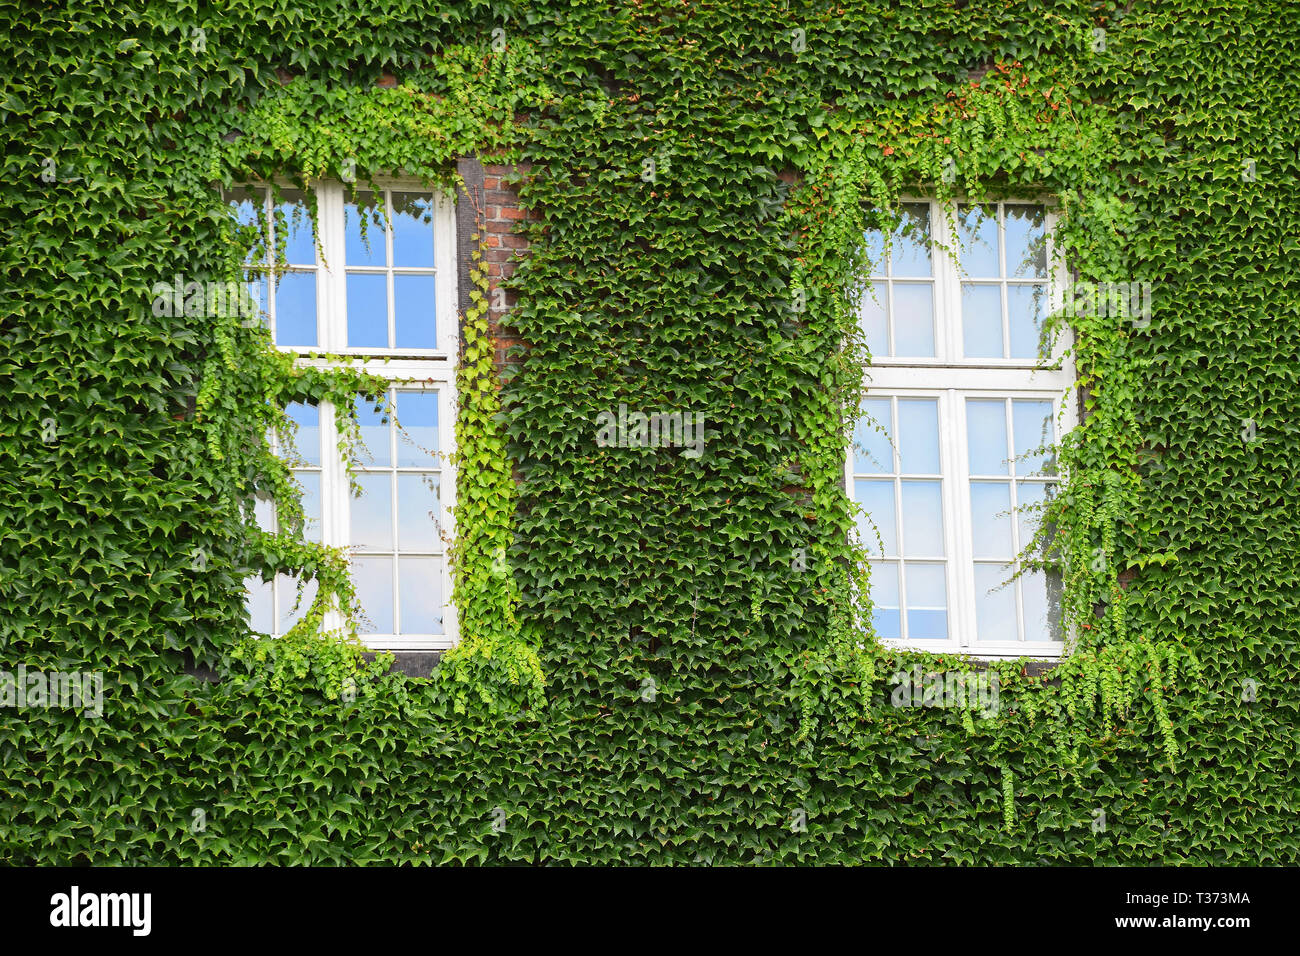 Windows of old mansion house on brick wall mantled with ivy, summer day Stock Photo